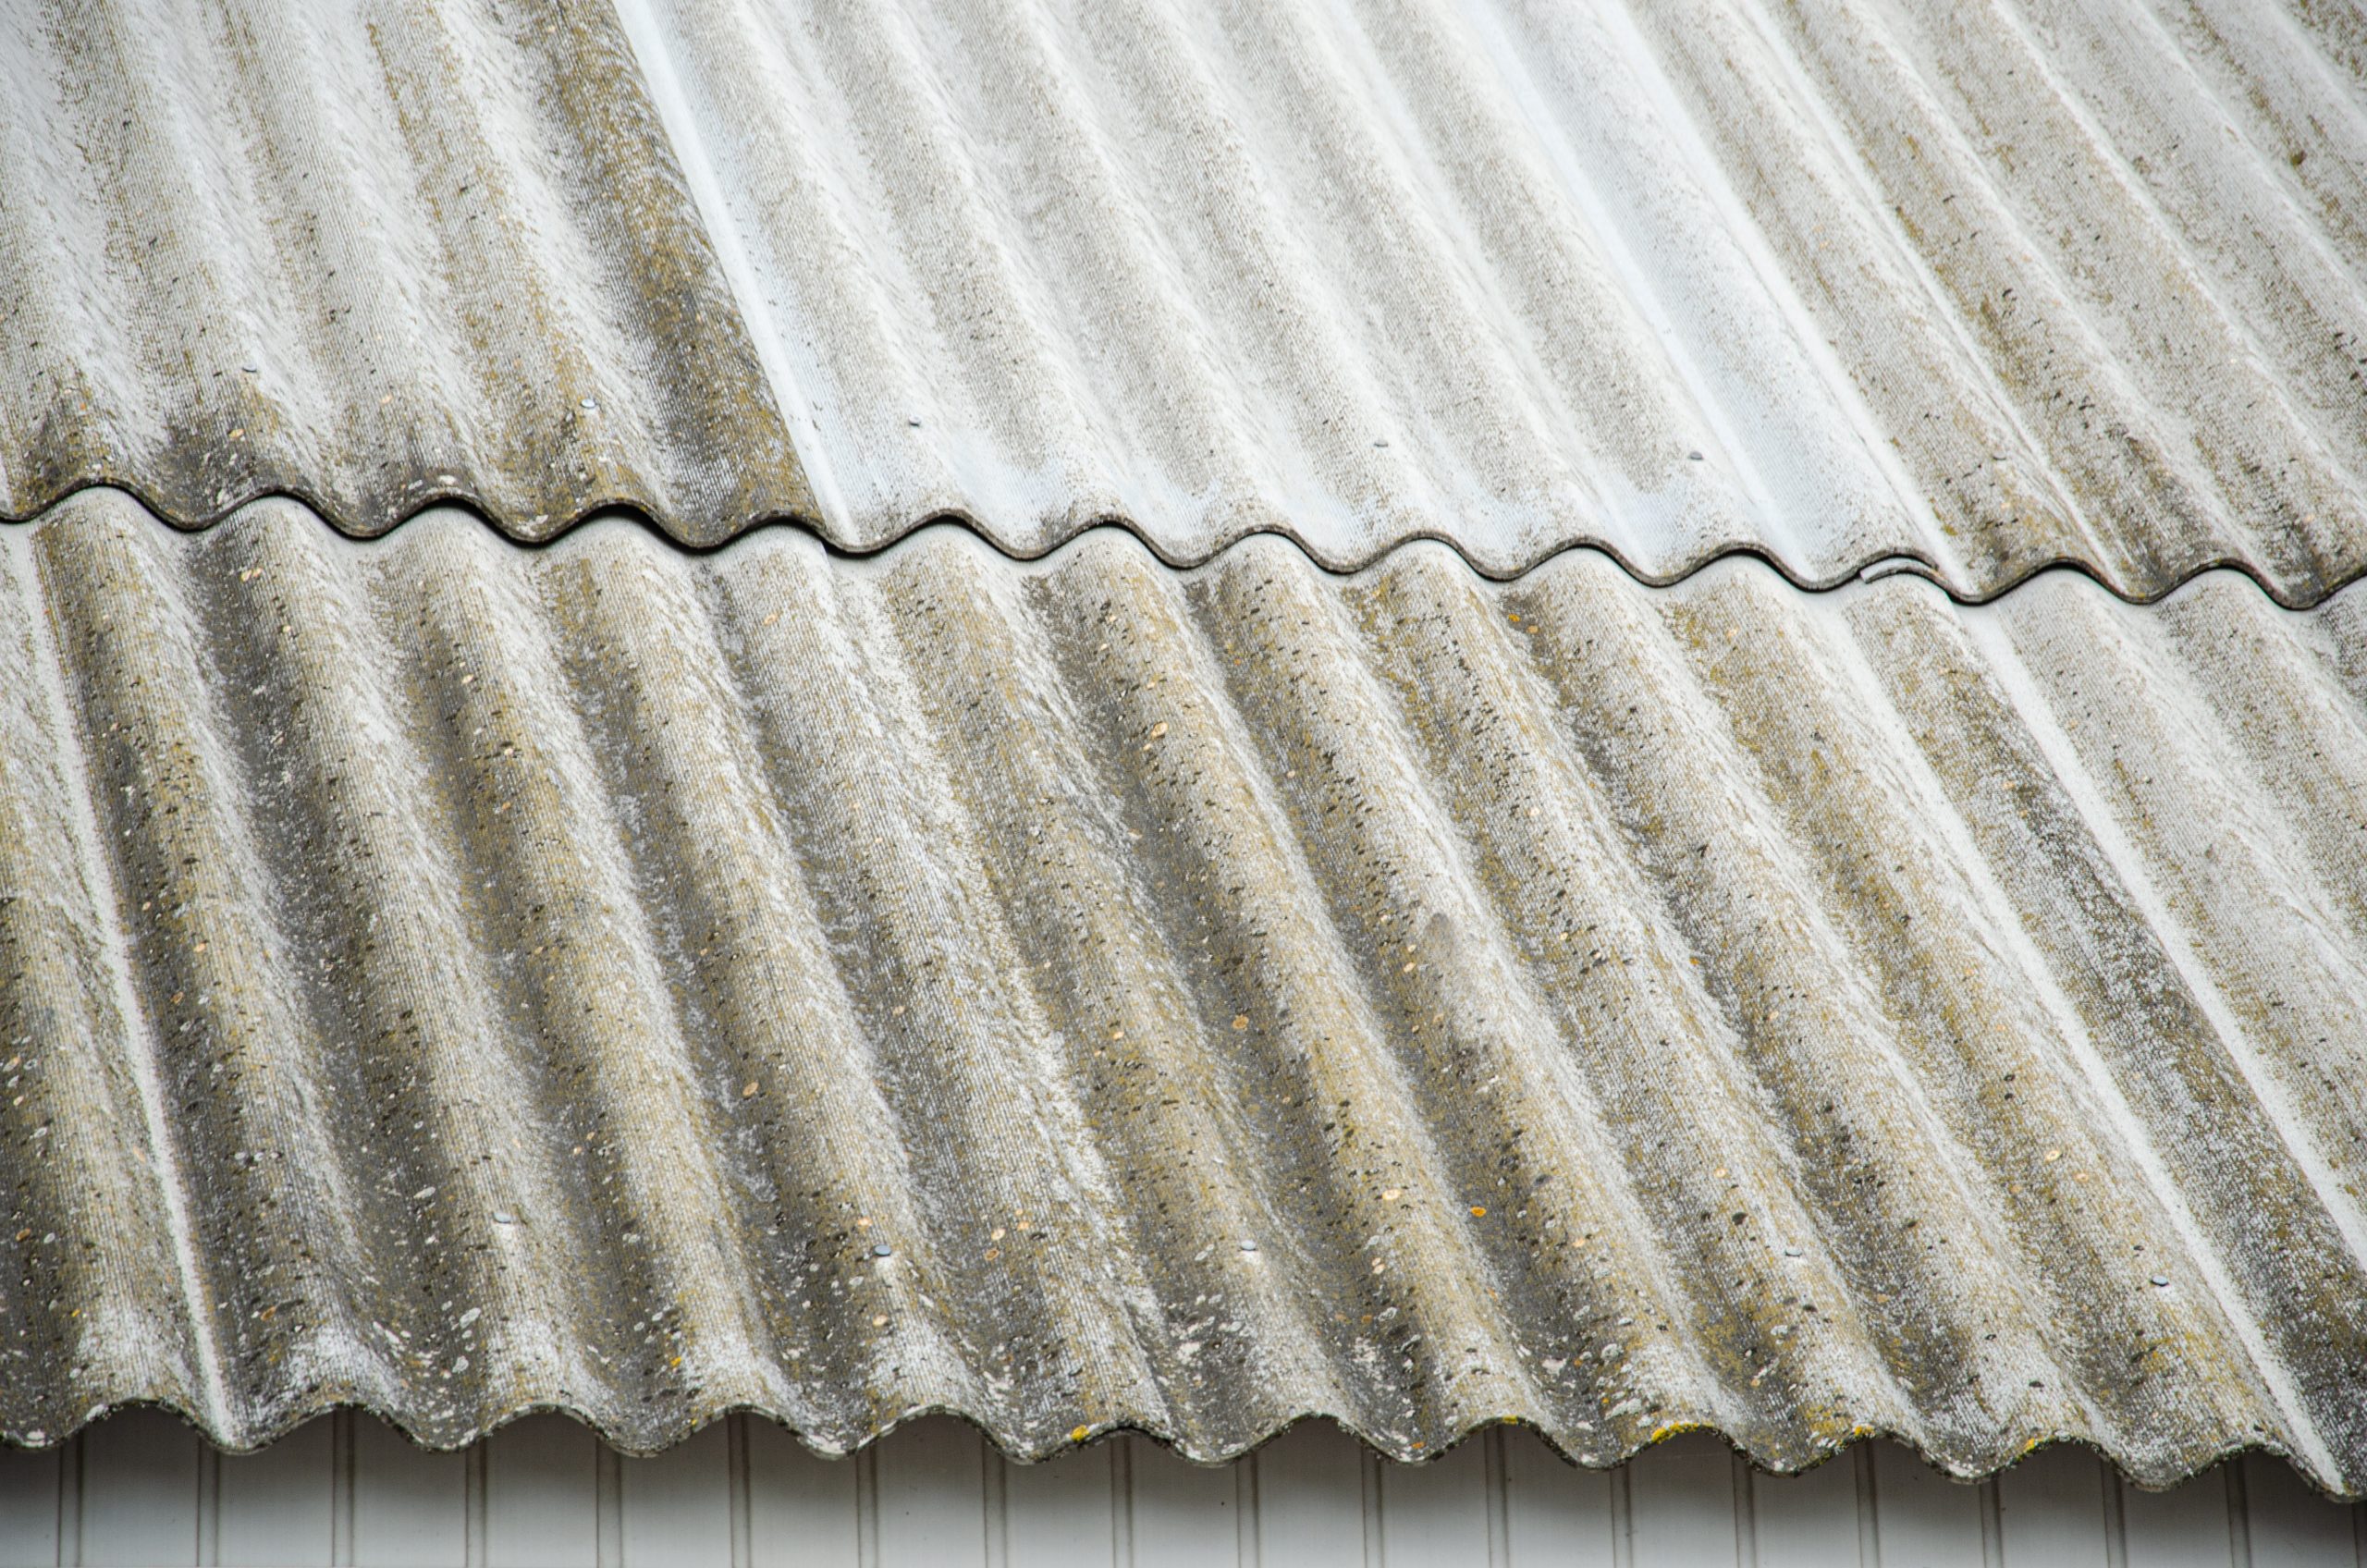 Old wavy slate roof . Texture of old slate . Shed roof covered with old asbestos sheets.